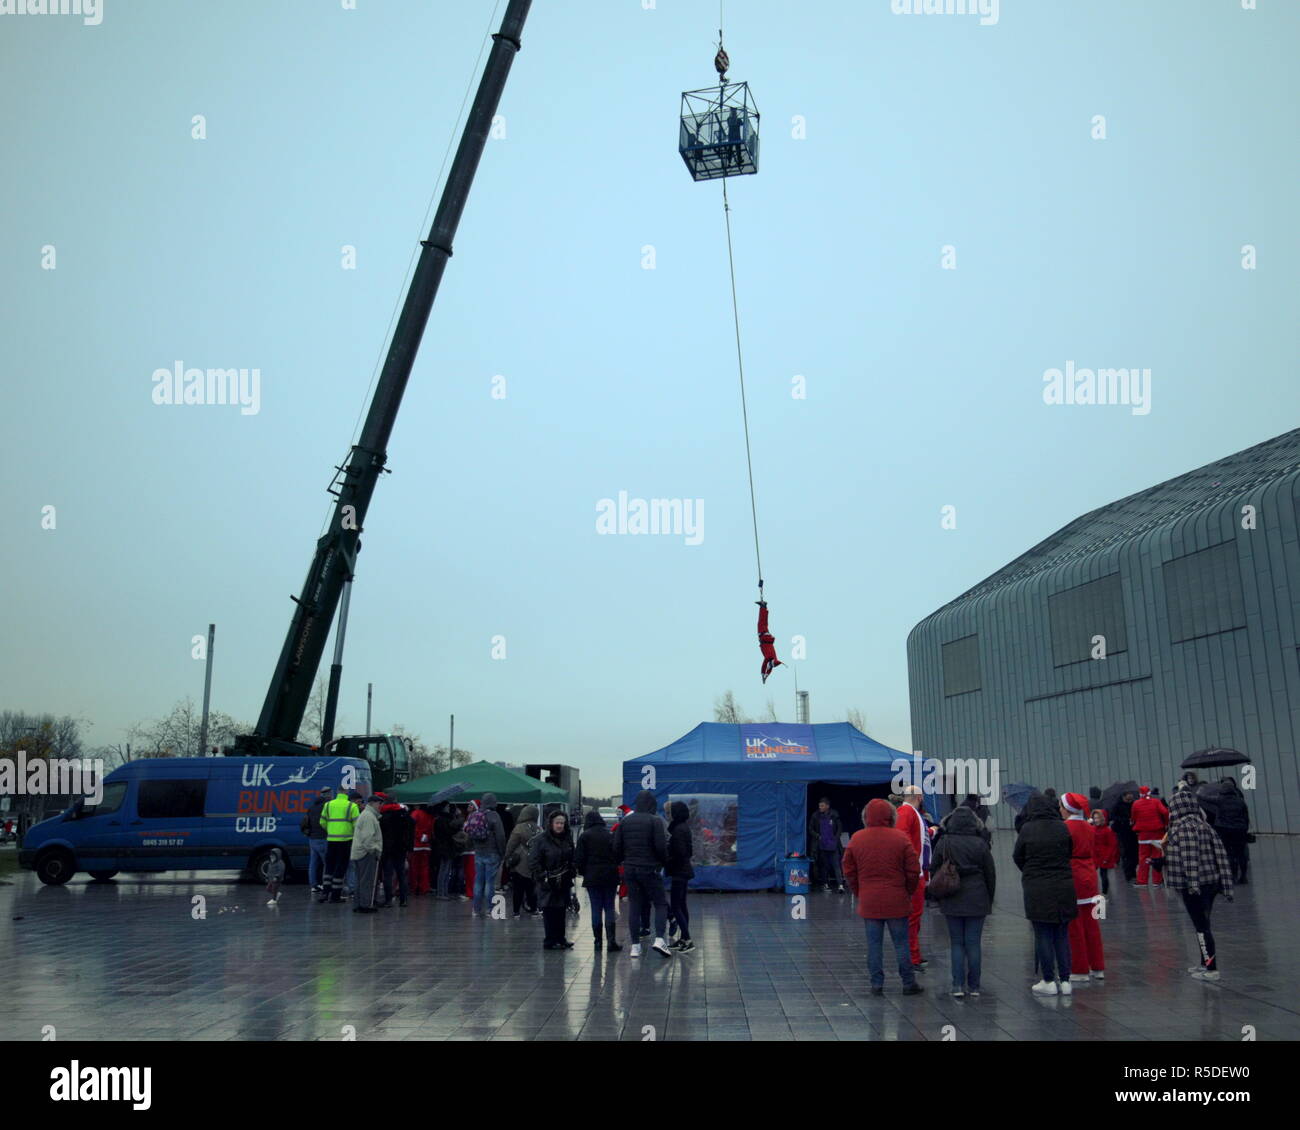 Glasgow, Scotland, UK 1st December, 2018. The annual Riverside Christmas Festival in the  famous city Riverside  transport museum today as well as its markets inside and fairground attractions outside had Christmas Santas aleaping for charity as people bungee jumped in costume for various charities with the uk Bungee club.  Gerard Ferry/Alamy news Credit: gerard ferry/Alamy Live News Stock Photo